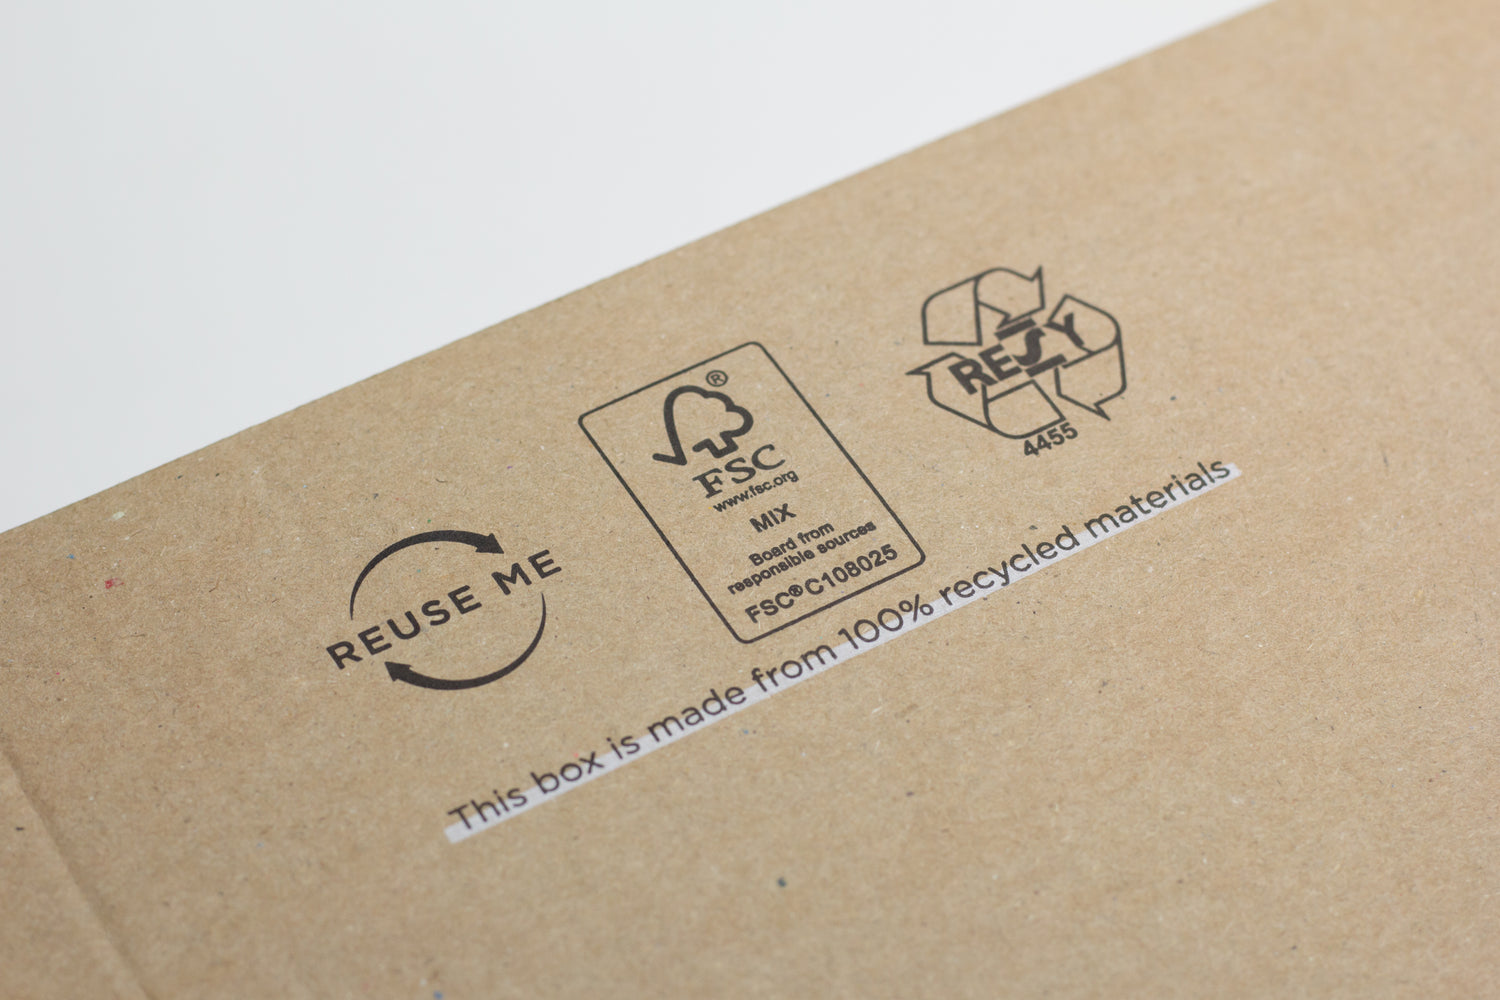 All labels, tags and packaging made from FSC®-certified paper